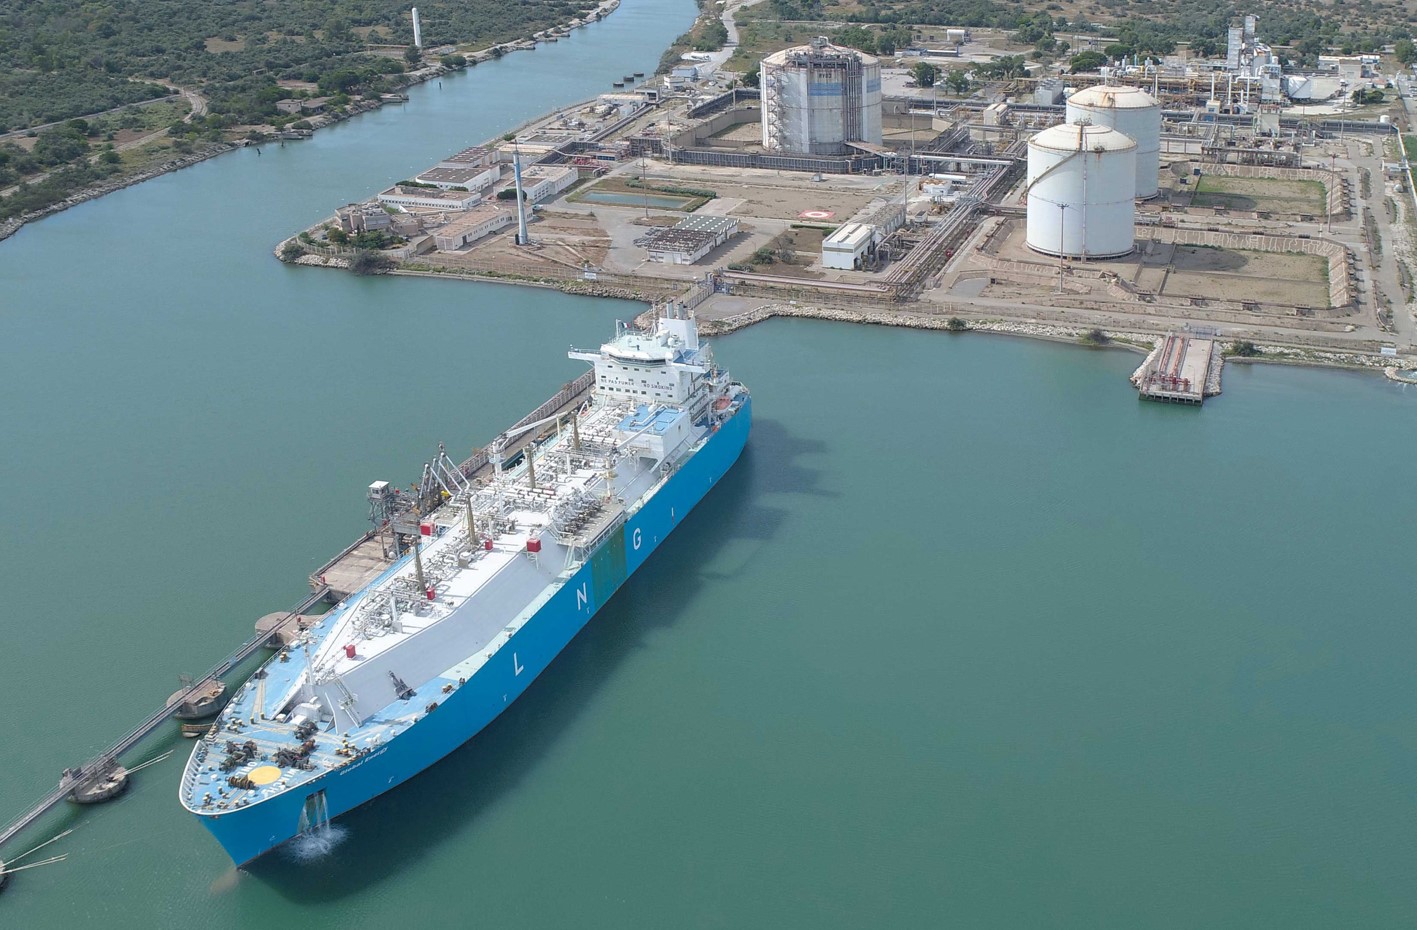 Elengy Fos Tonkin and Fos Cavaou LNG sendout reduced due to strike